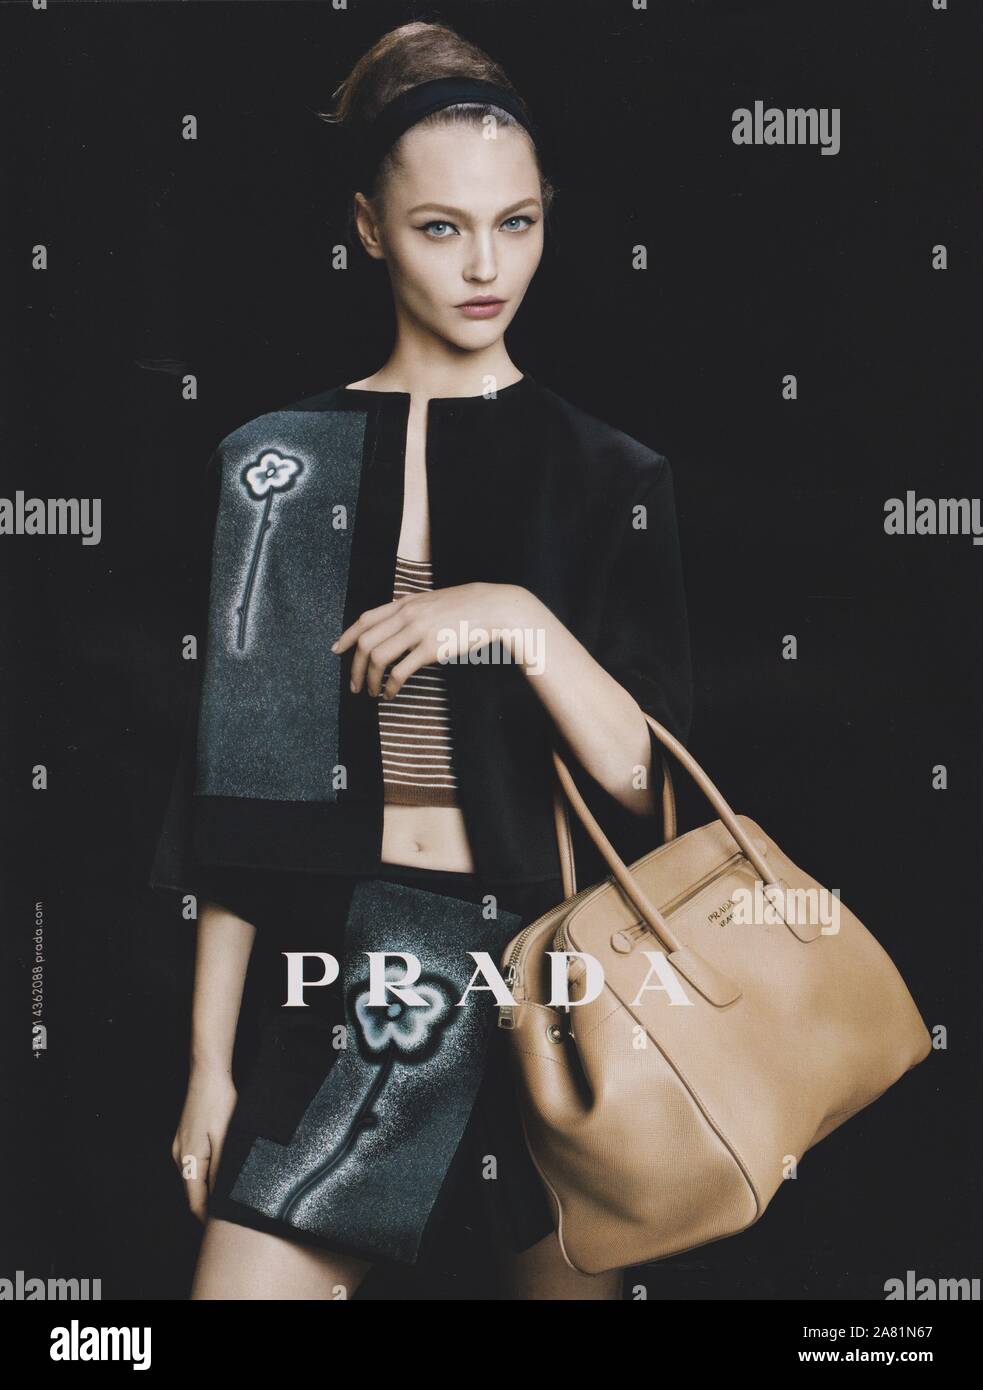 poster advertising PRADA fashion house in paper magazine from 2013 year,  advertisement, creative PRADA advert from 2010s Stock Photo - Alamy